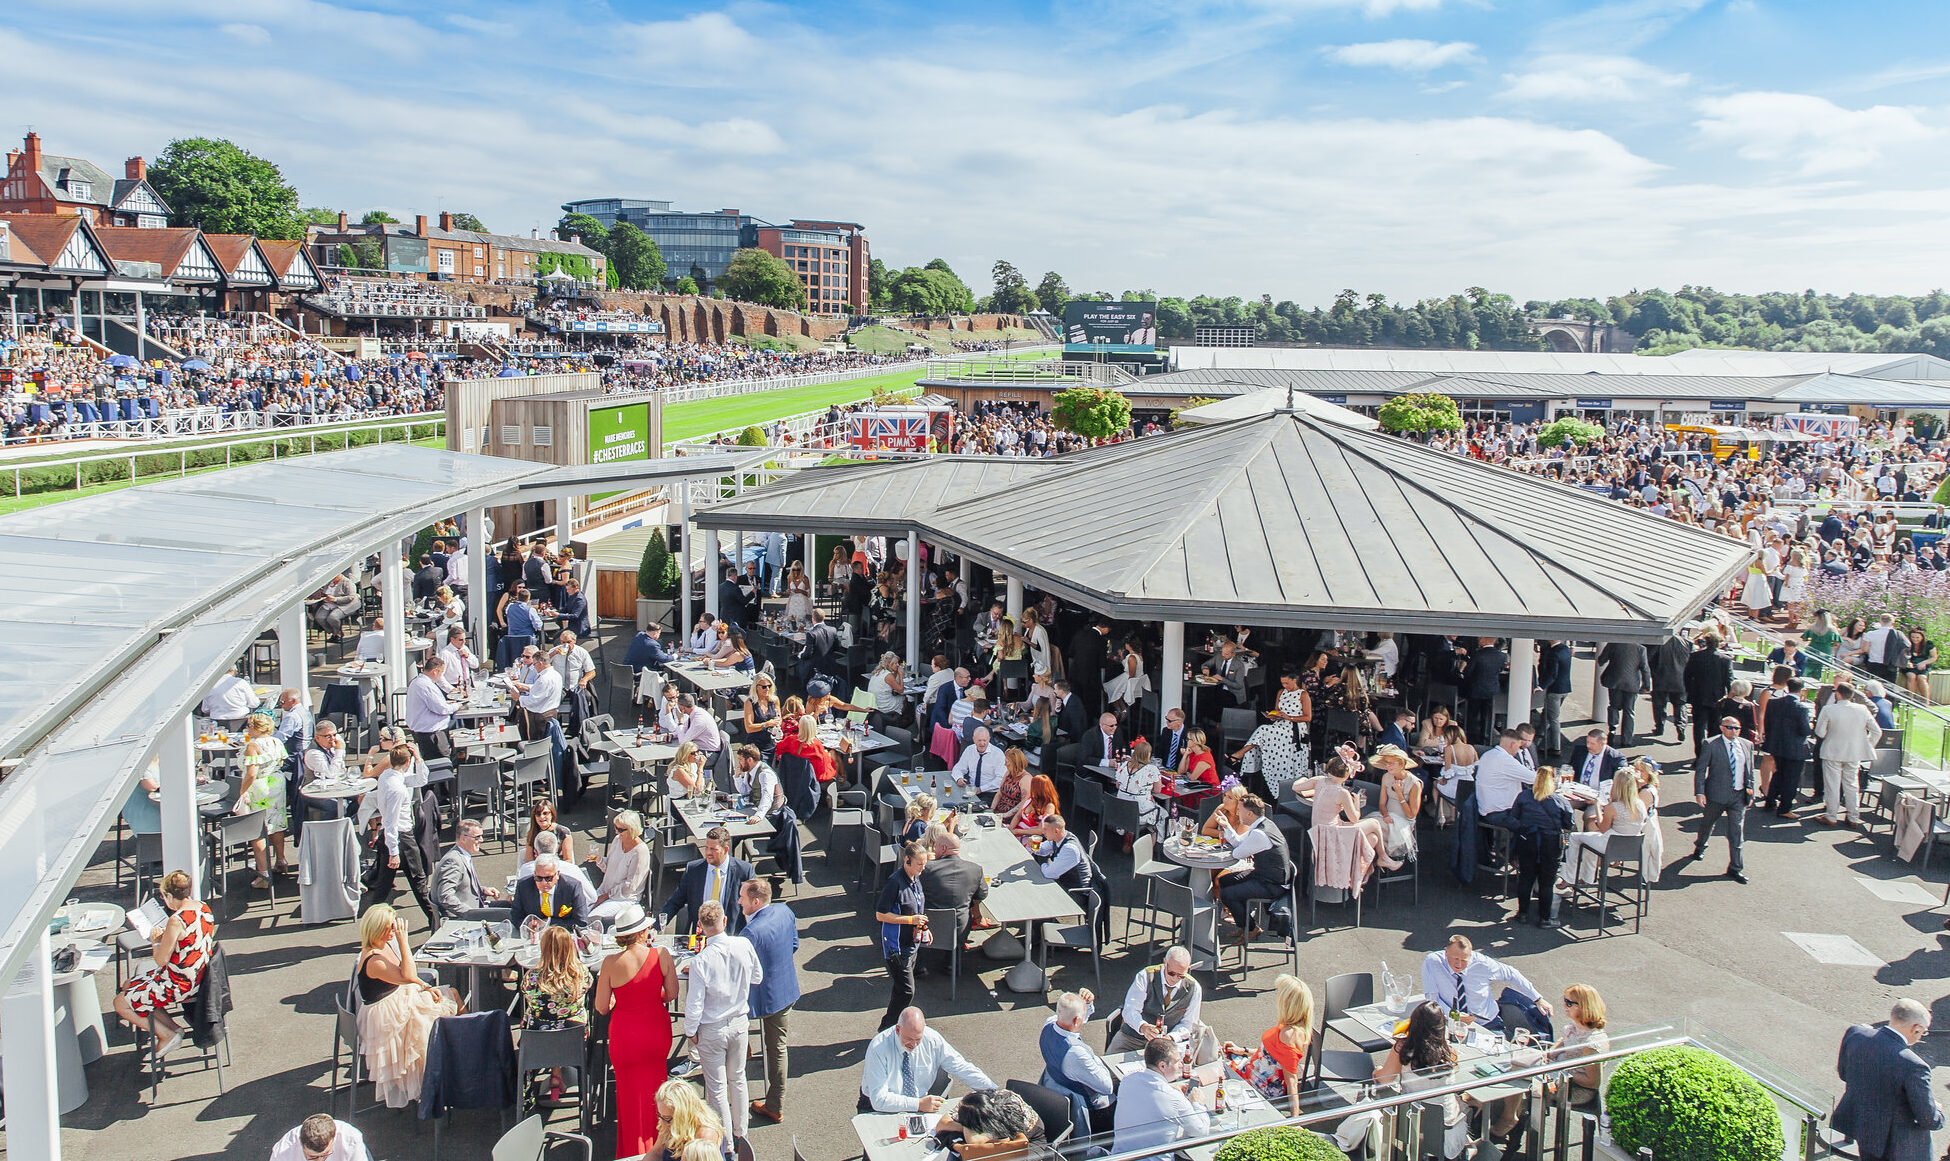 Chester Racecourse Win Taste Of Racecourses Award and Rank Top 10 For Customer Experience thumbnail image